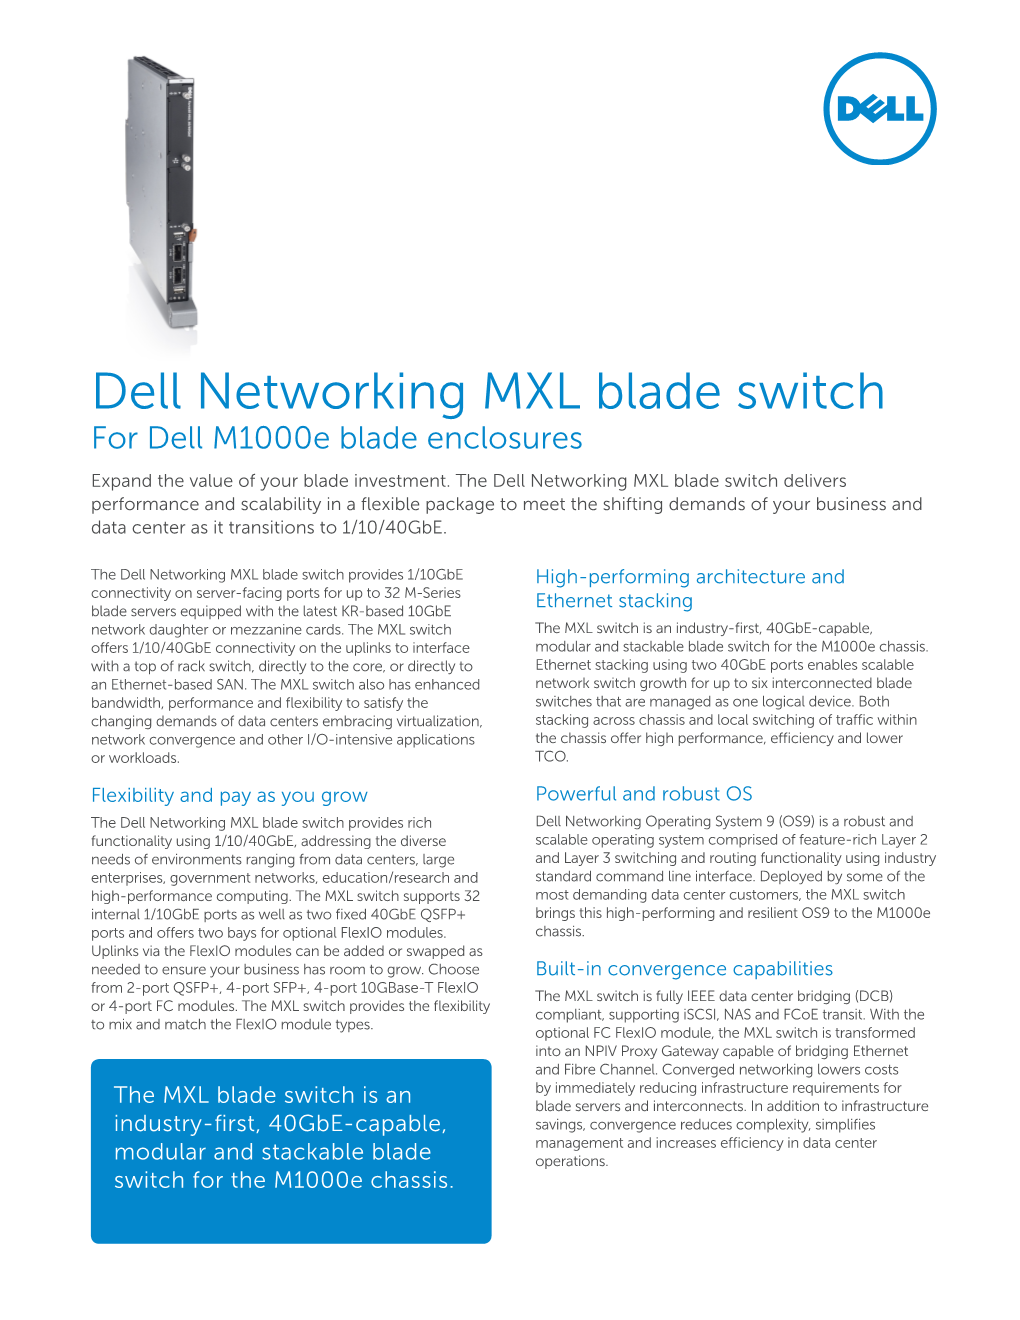 Dell Networking MXL Blade Switch for Dell M1000e Blade Enclosures Expand the Value of Your Blade Investment